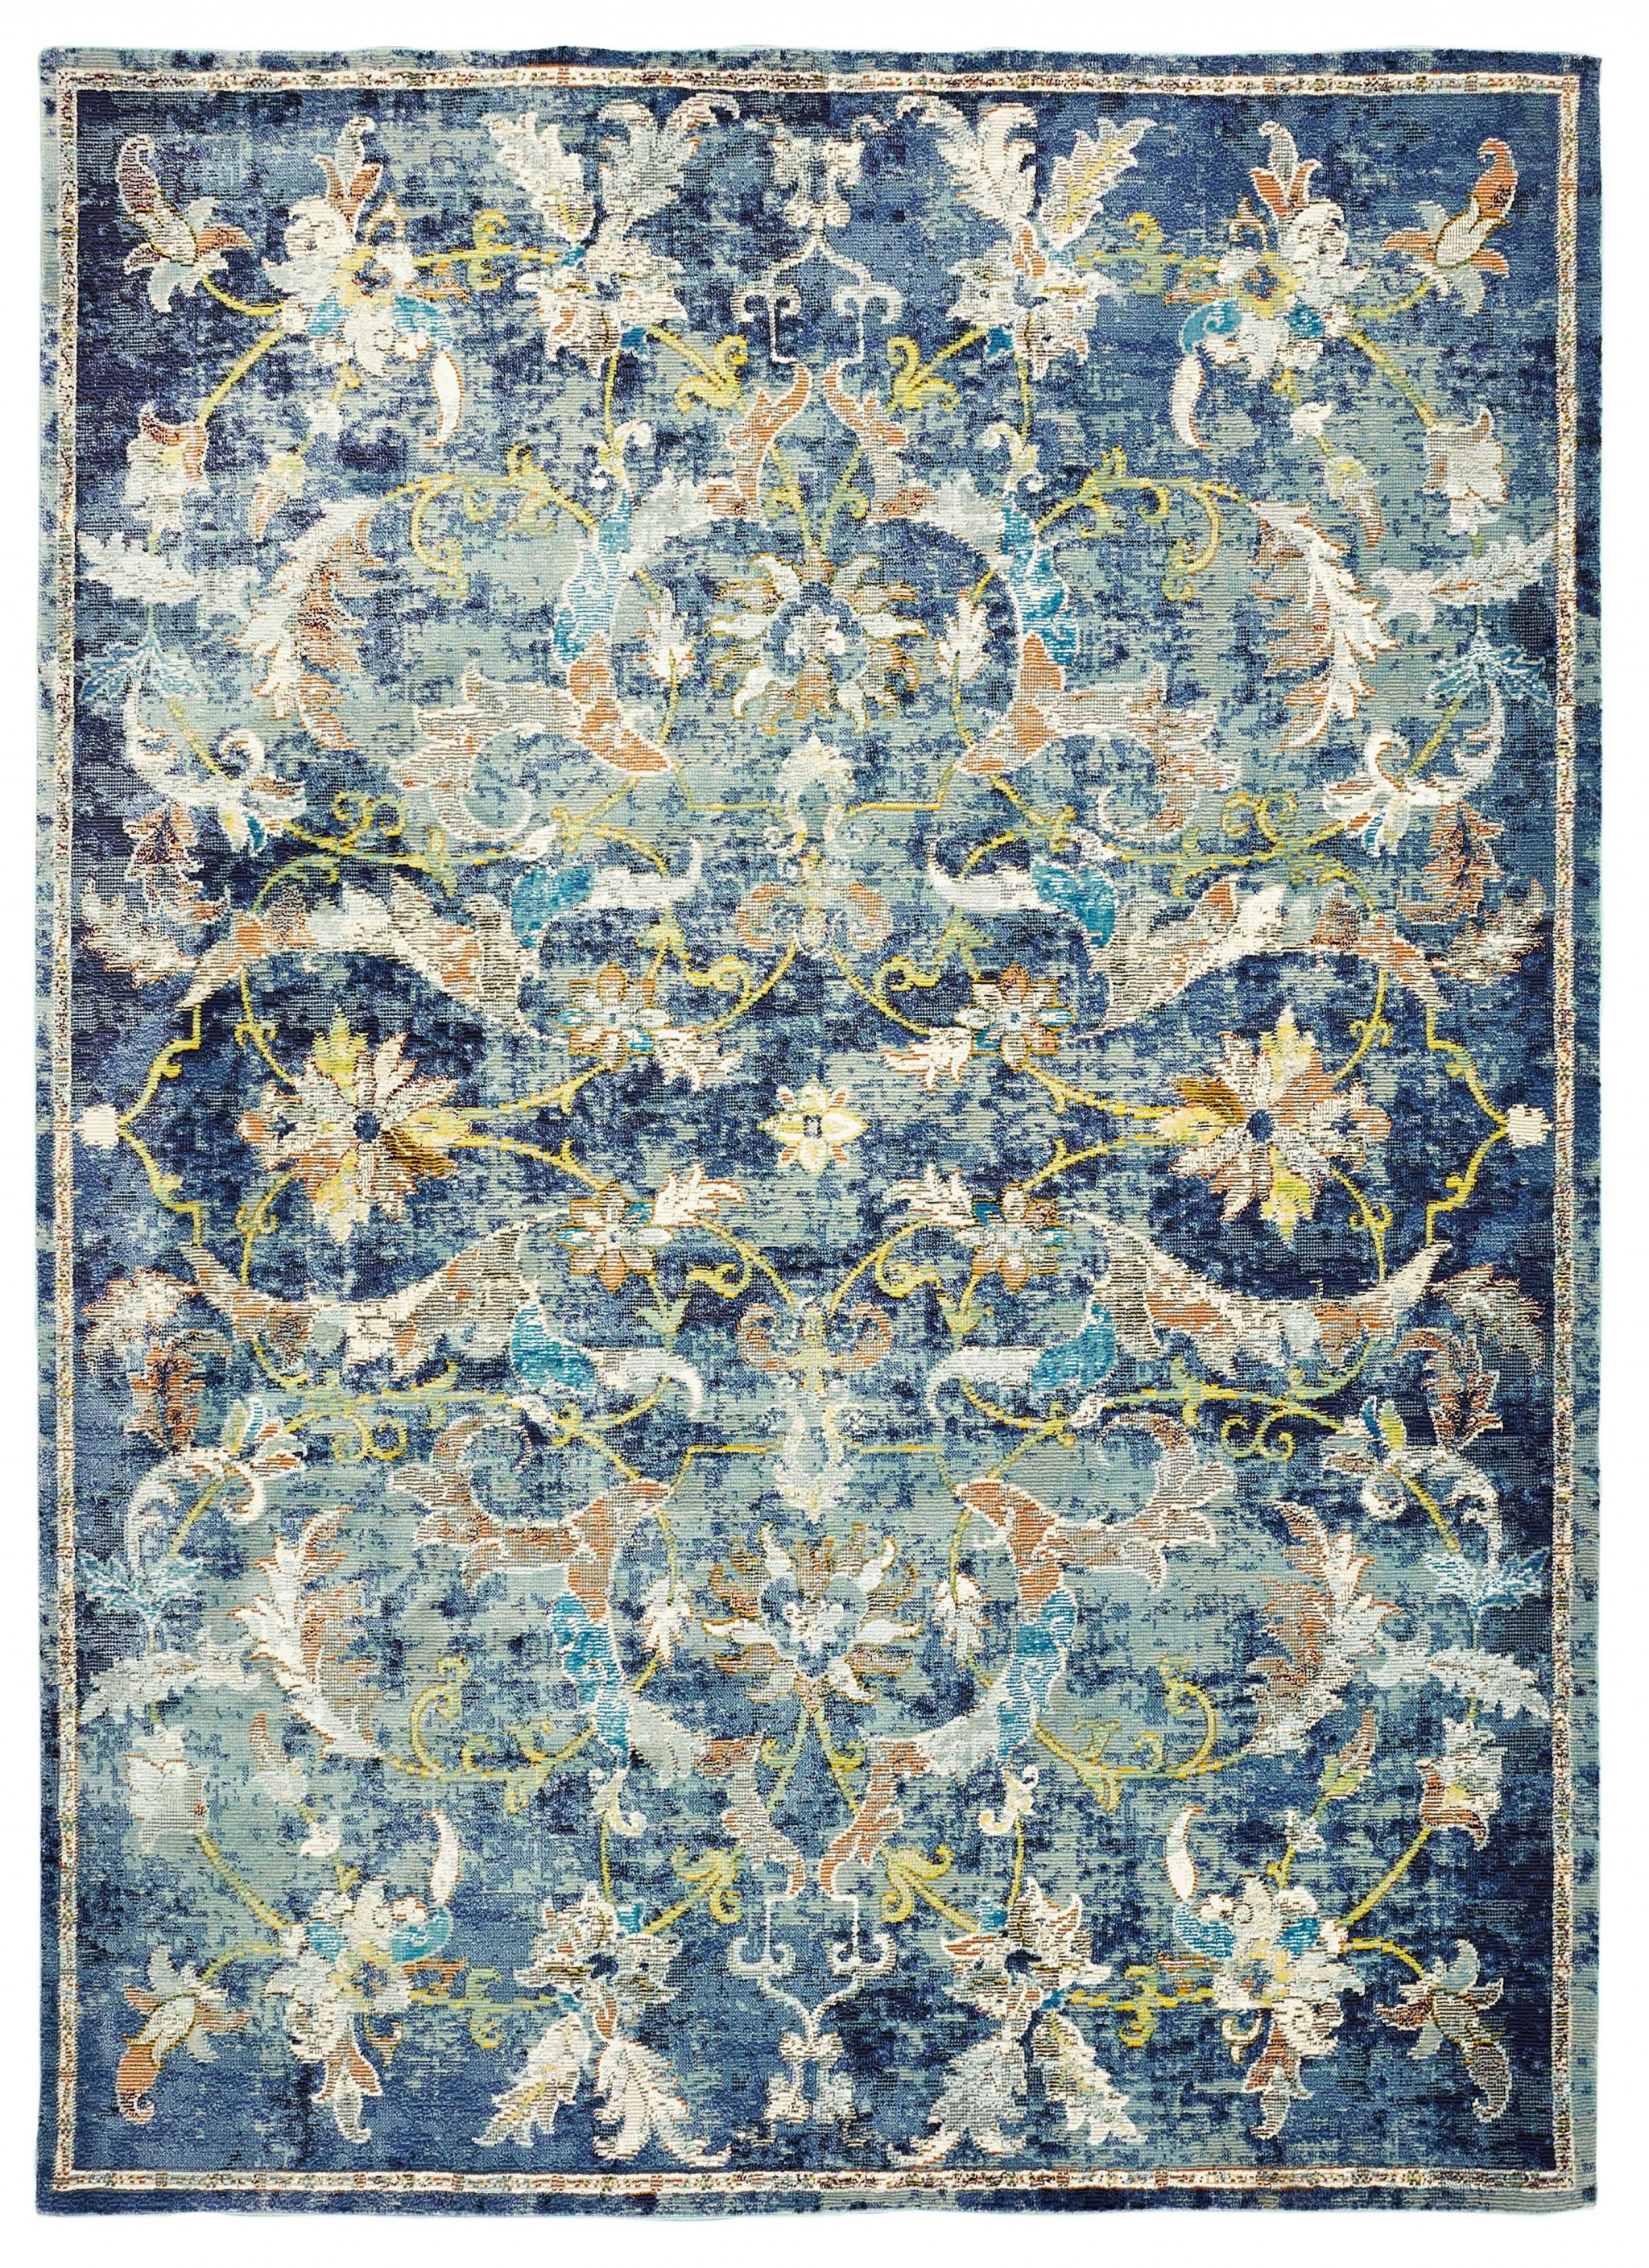 4’ x 6’ Blue and White Jacobean Pattern Area Rug-395704-1